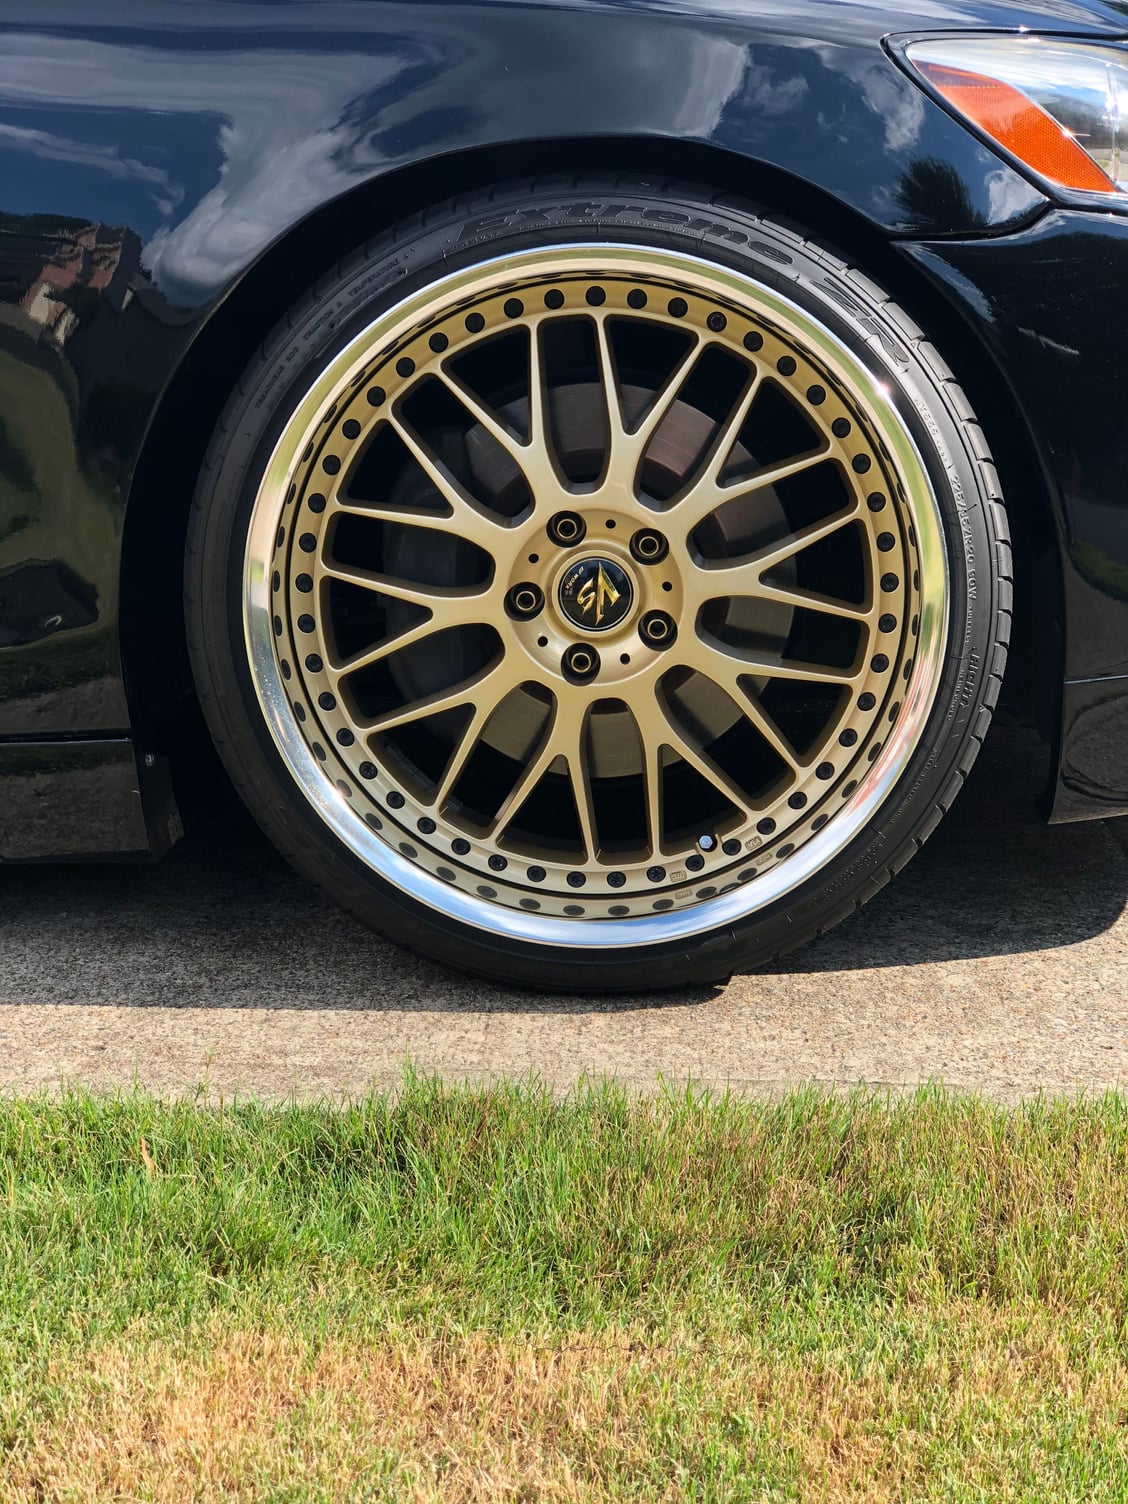 Wheels and Tires/Axles - Work Wheel VSXX Gold 20x9.5 -2 and 20x10.5 0 with good tires! BBK Friendly - Used - All Years Any Make All Models - Duluth, GA 30097, United States